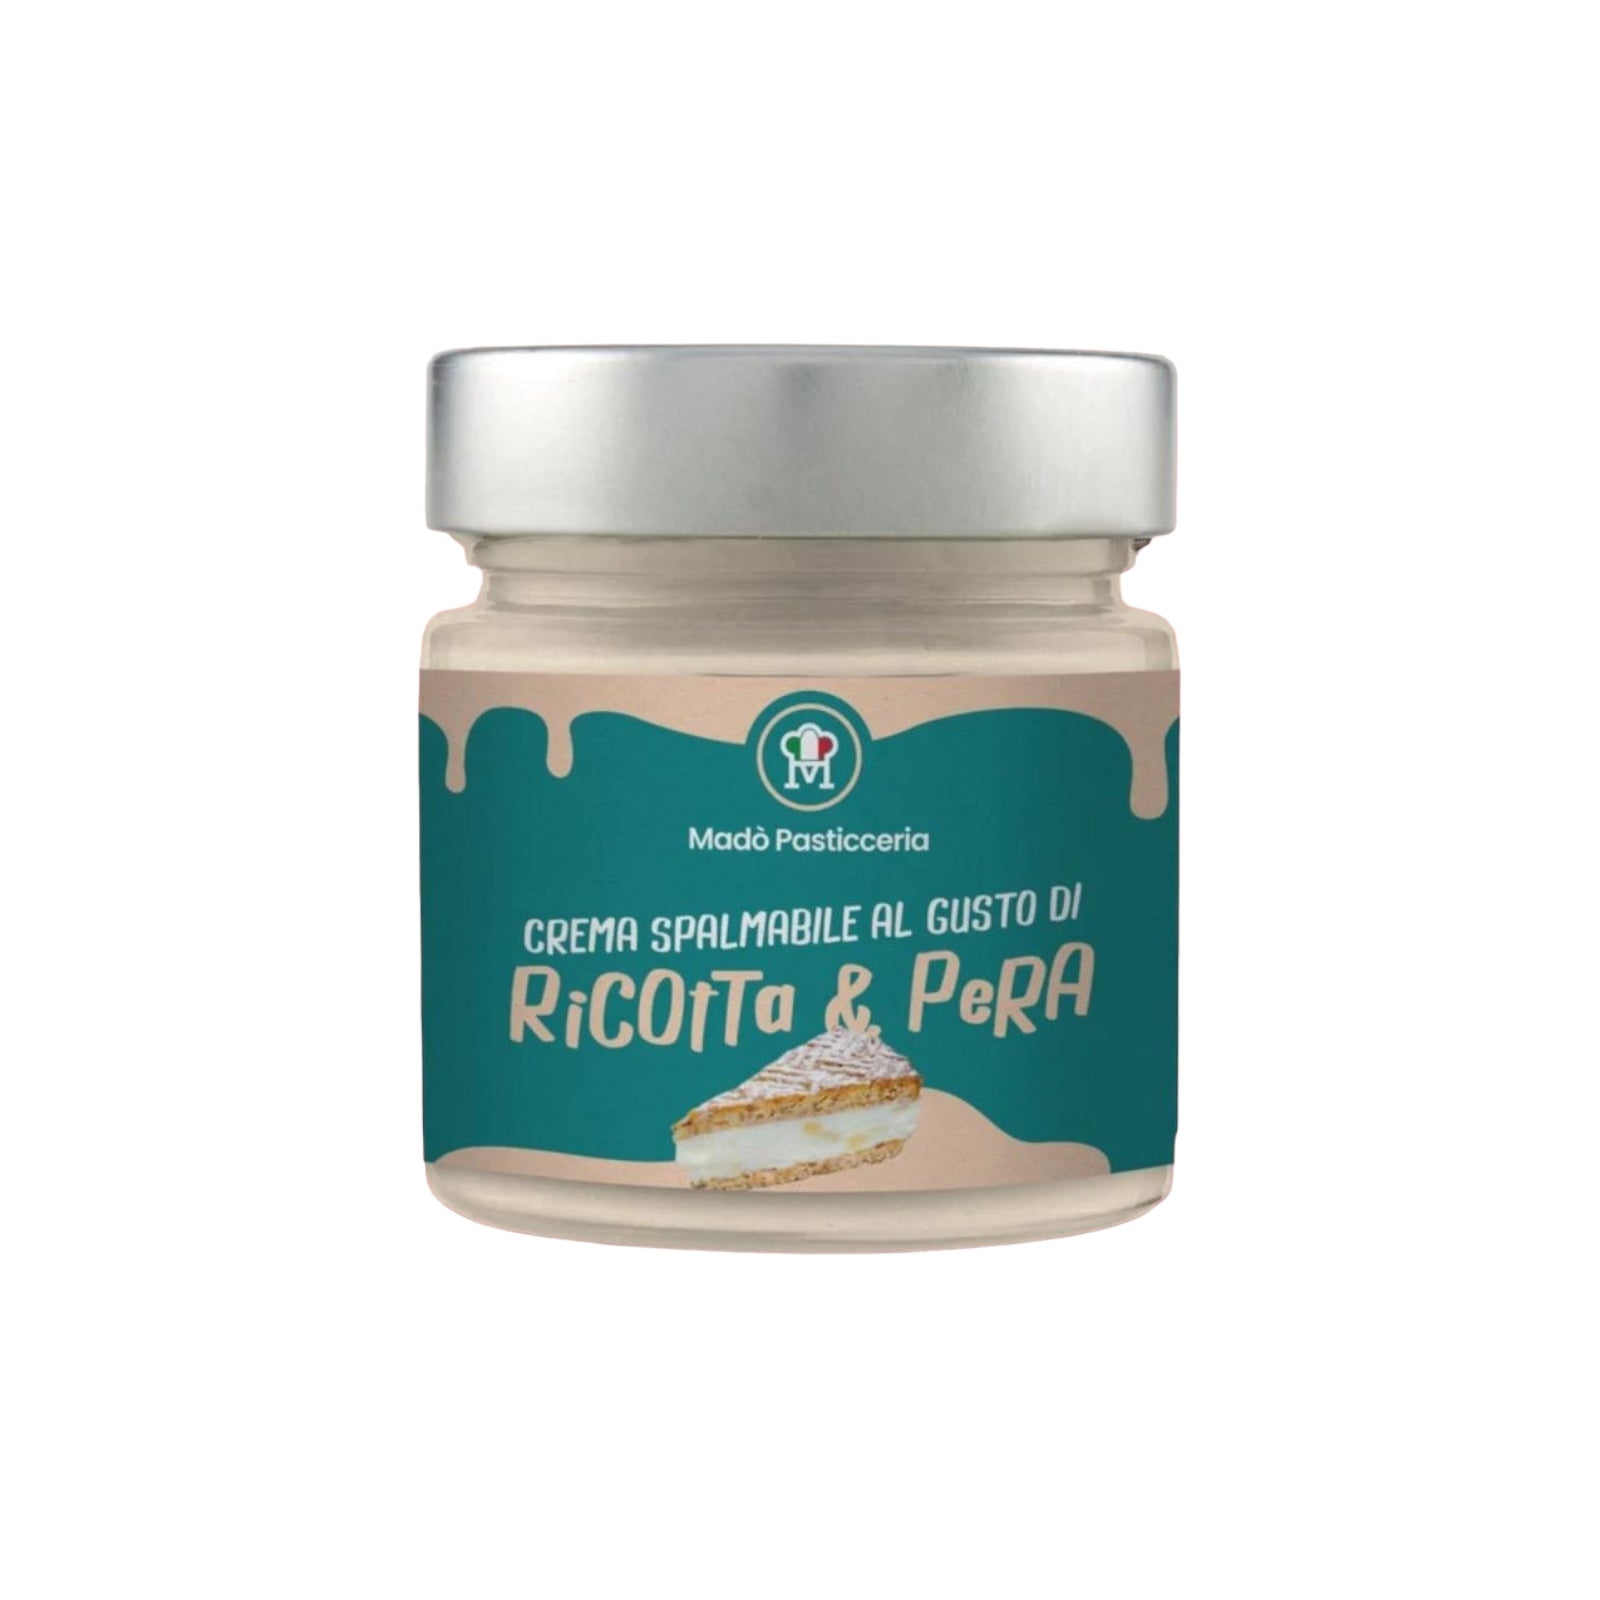 Ricotta and Pear Spreadable Cream by Madó Pasticceria 
Glass jar 200g